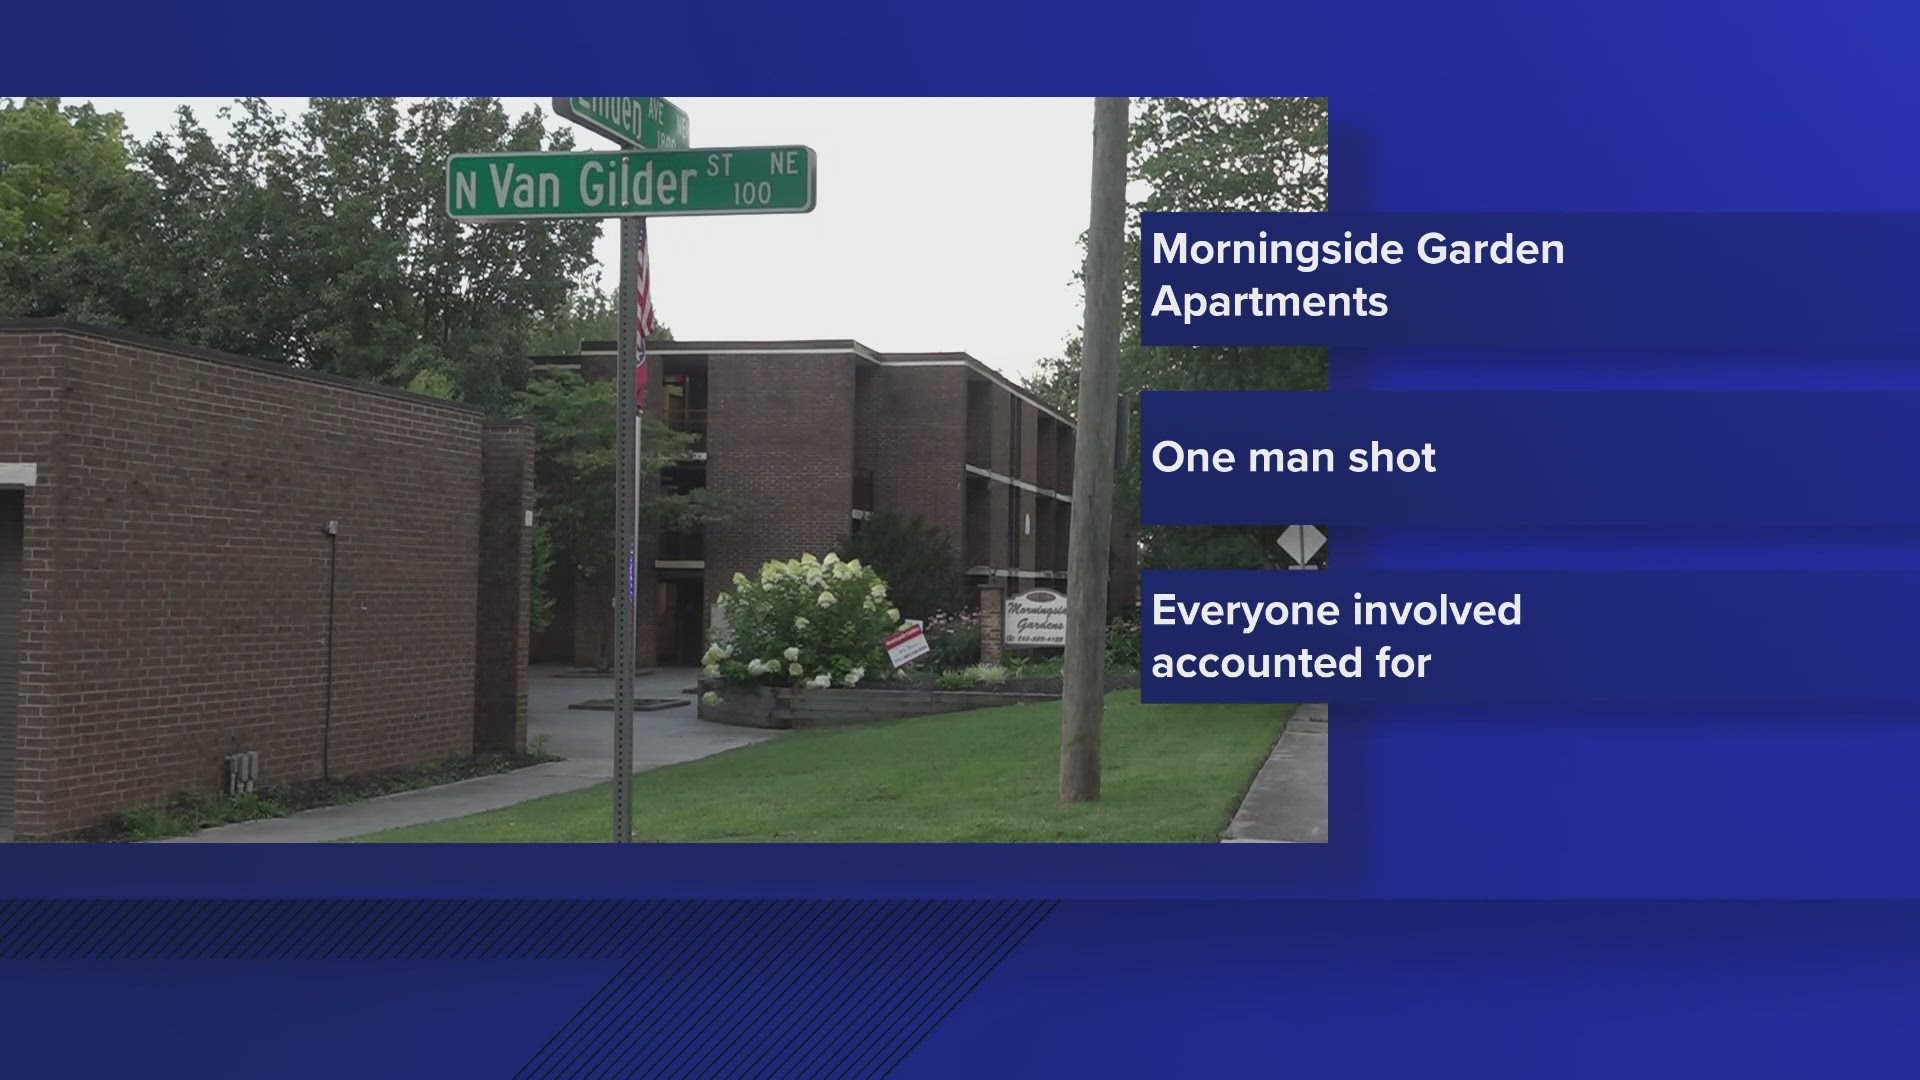 The shooting happened at Morningside Gardens Apartments. One man was shot and taken to the hospital.